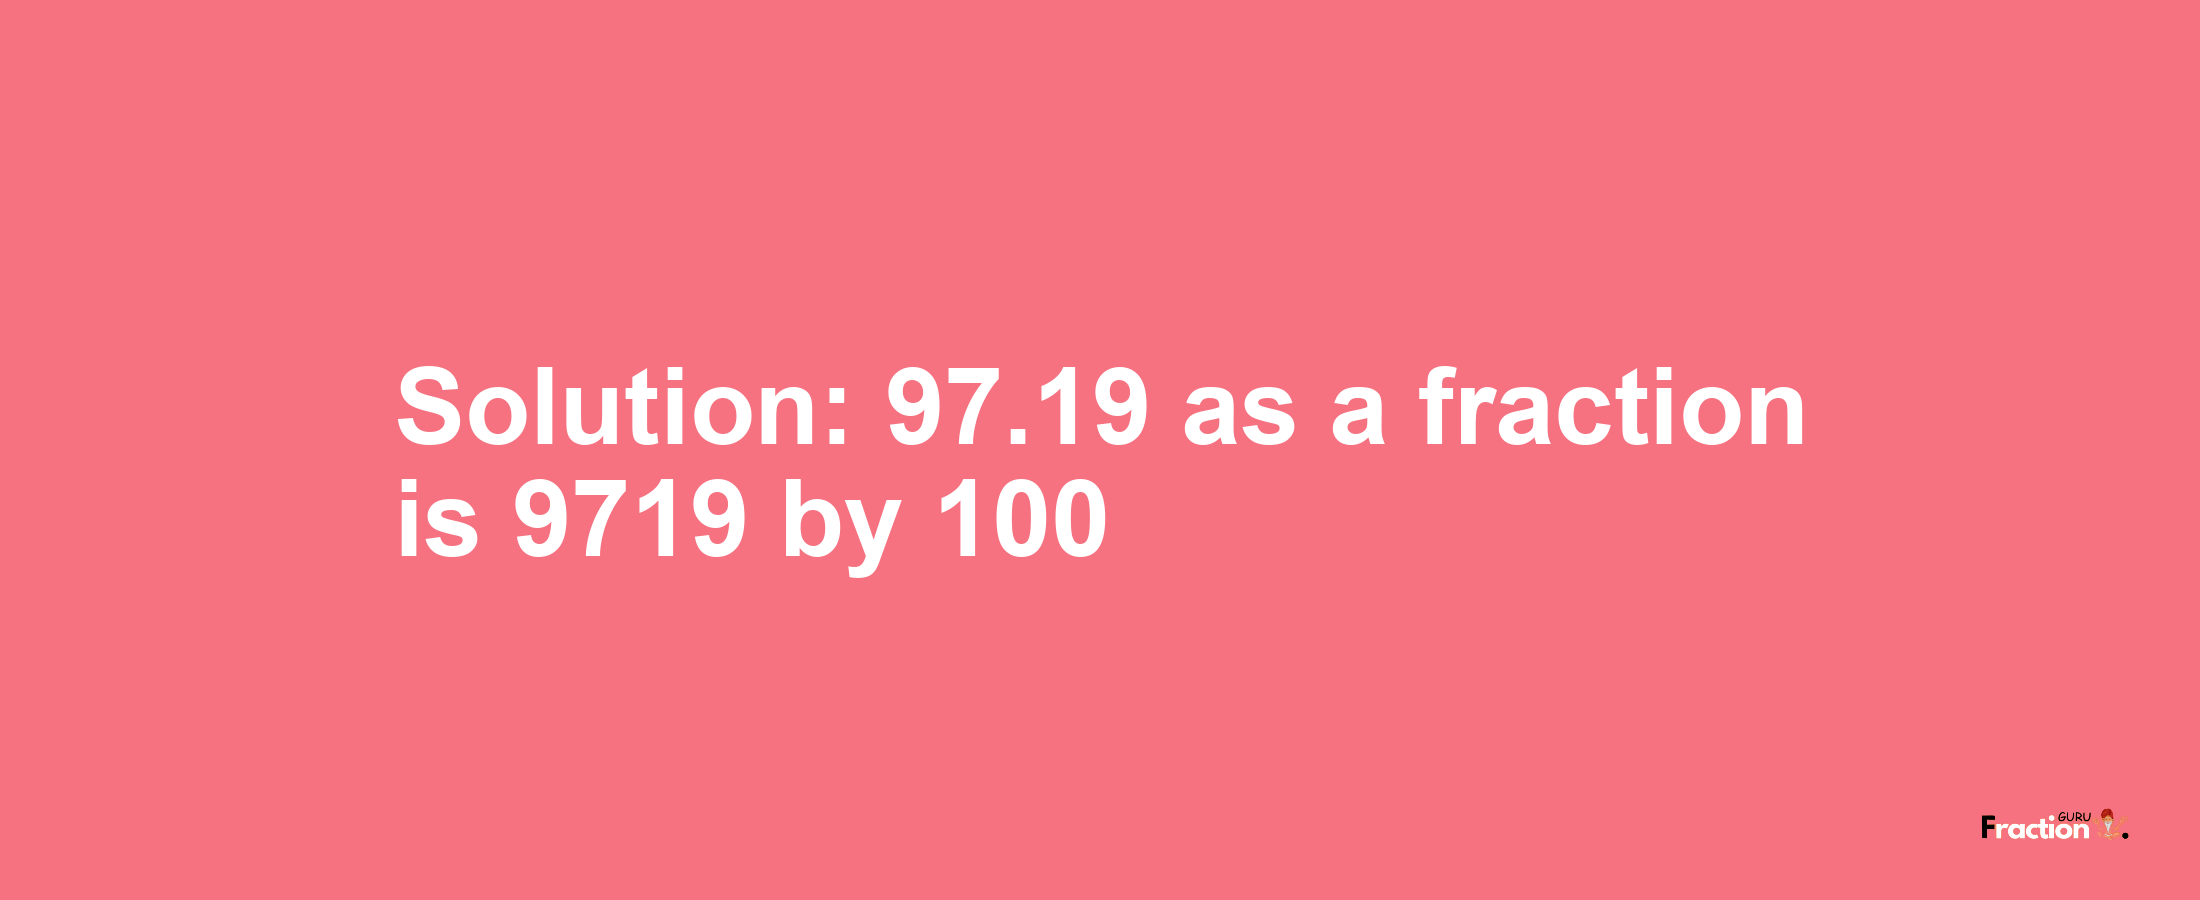 Solution:97.19 as a fraction is 9719/100